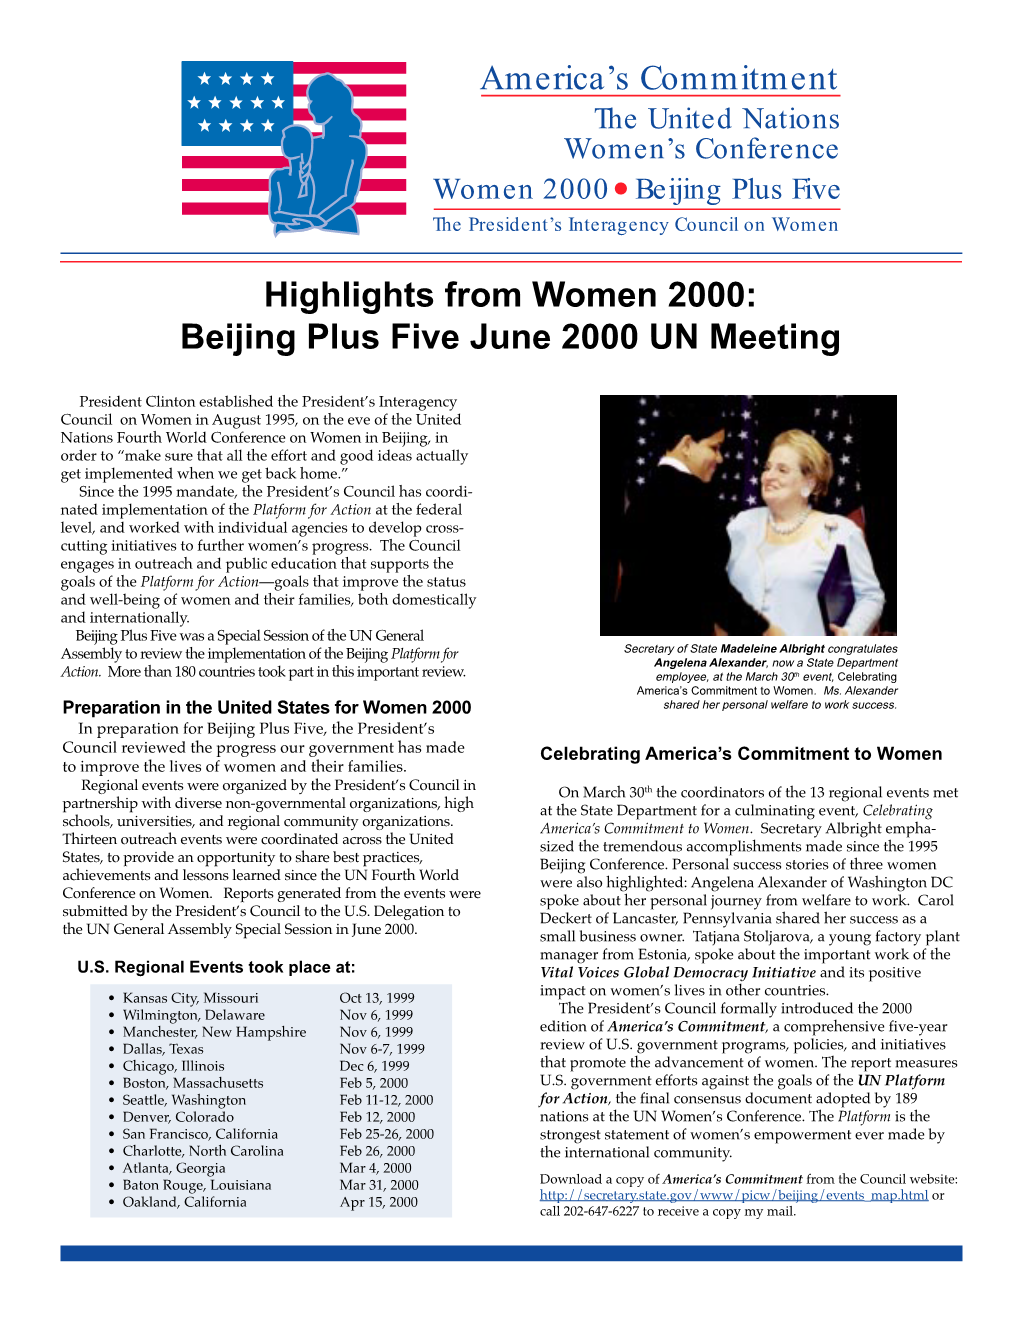 America's Commitment Highlights from Women 2000: Beijing Plus